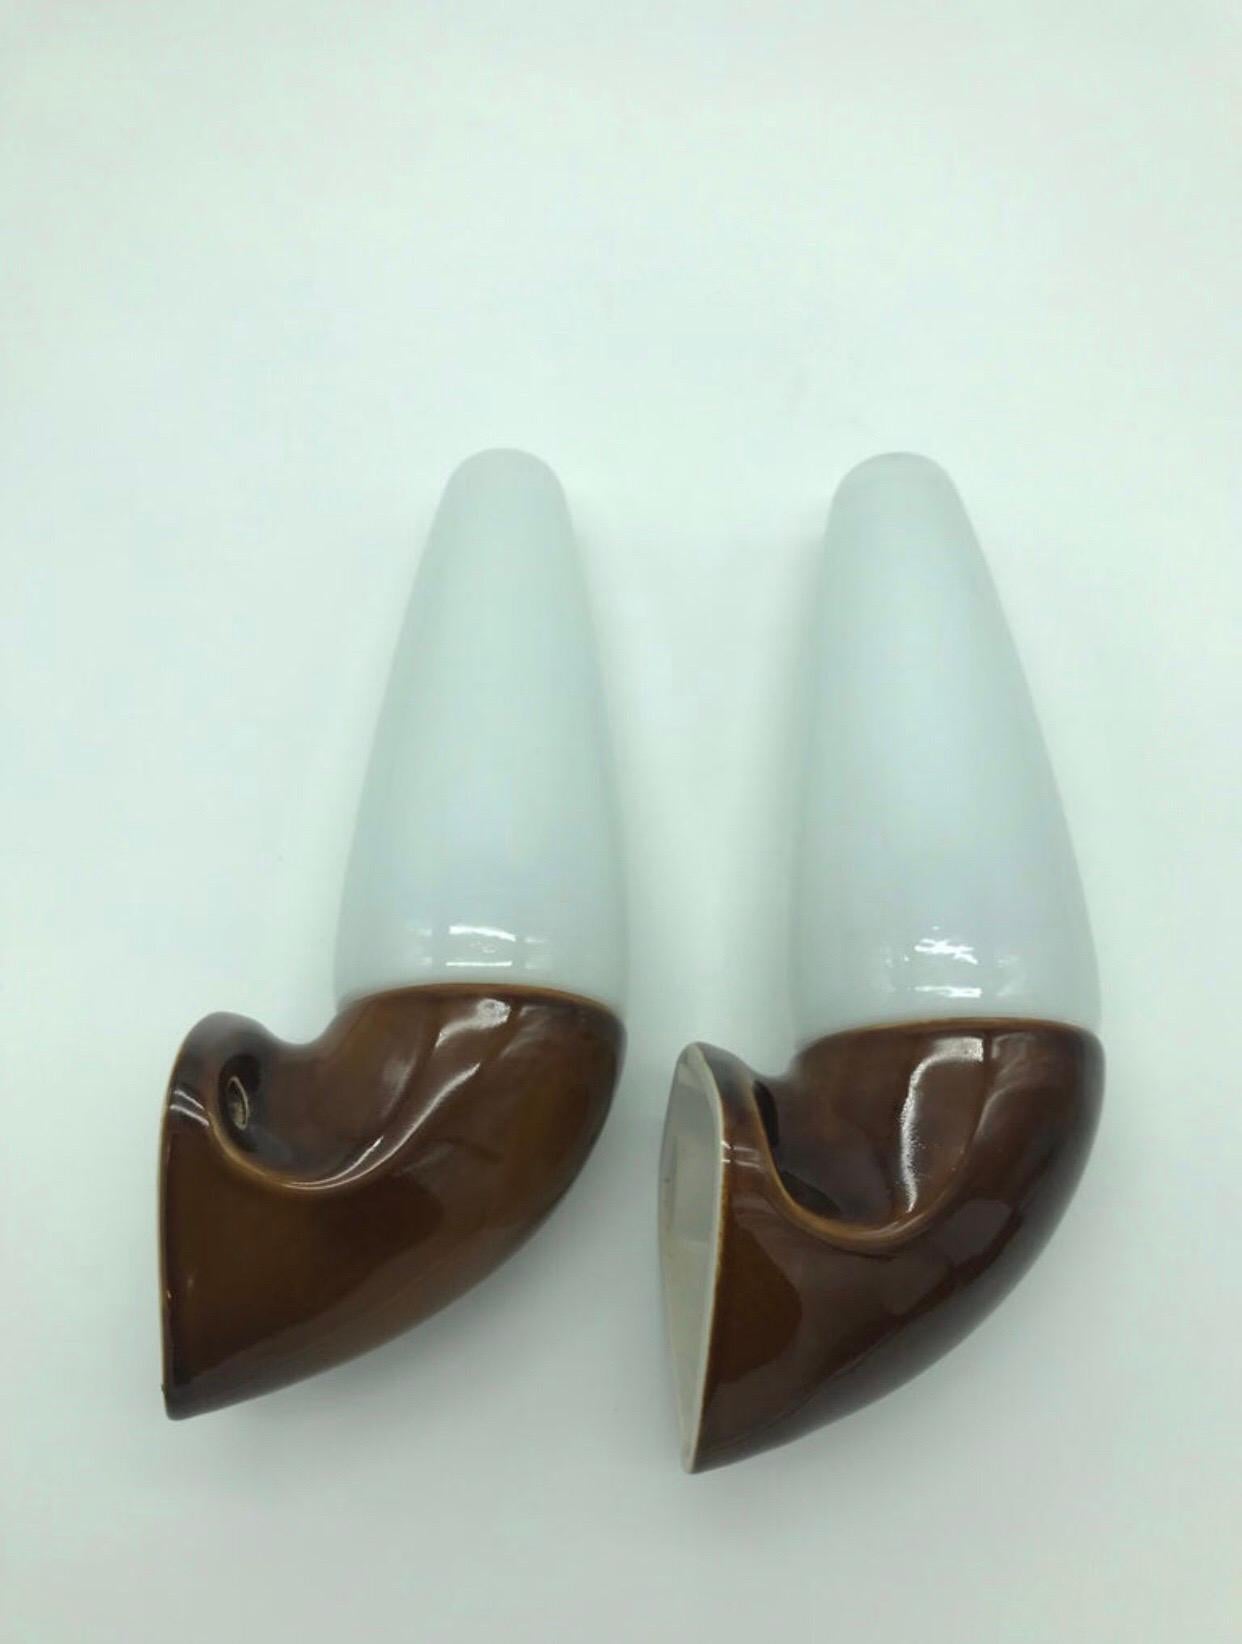 A pair of vintage Ifö of Sweden ceramic bathroom lamps from the 1960s in retro brown
Designed by Sigvard Bernadotte. 
Opaline glass shades. 
Ceramic bulb holders for an E14 bulb
Lamps can be used as up or down lights.
In great condition and